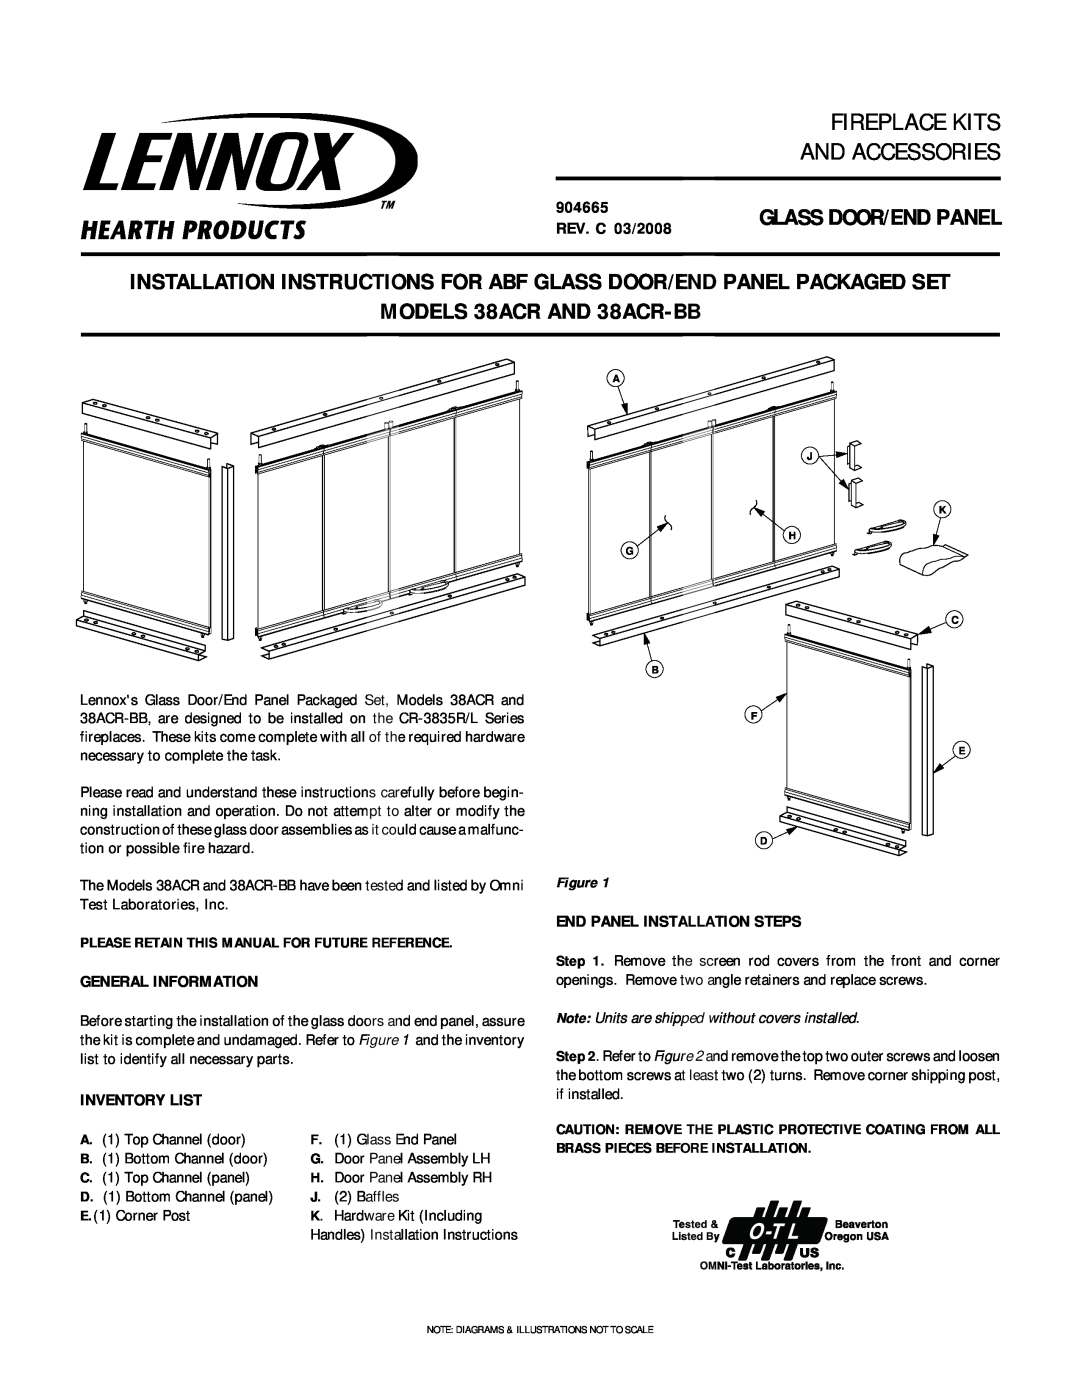 Miele 38ACR installation instructions 904665 REV. C 03/2008, General Information, Inventory List, Glass Door/End Panel 